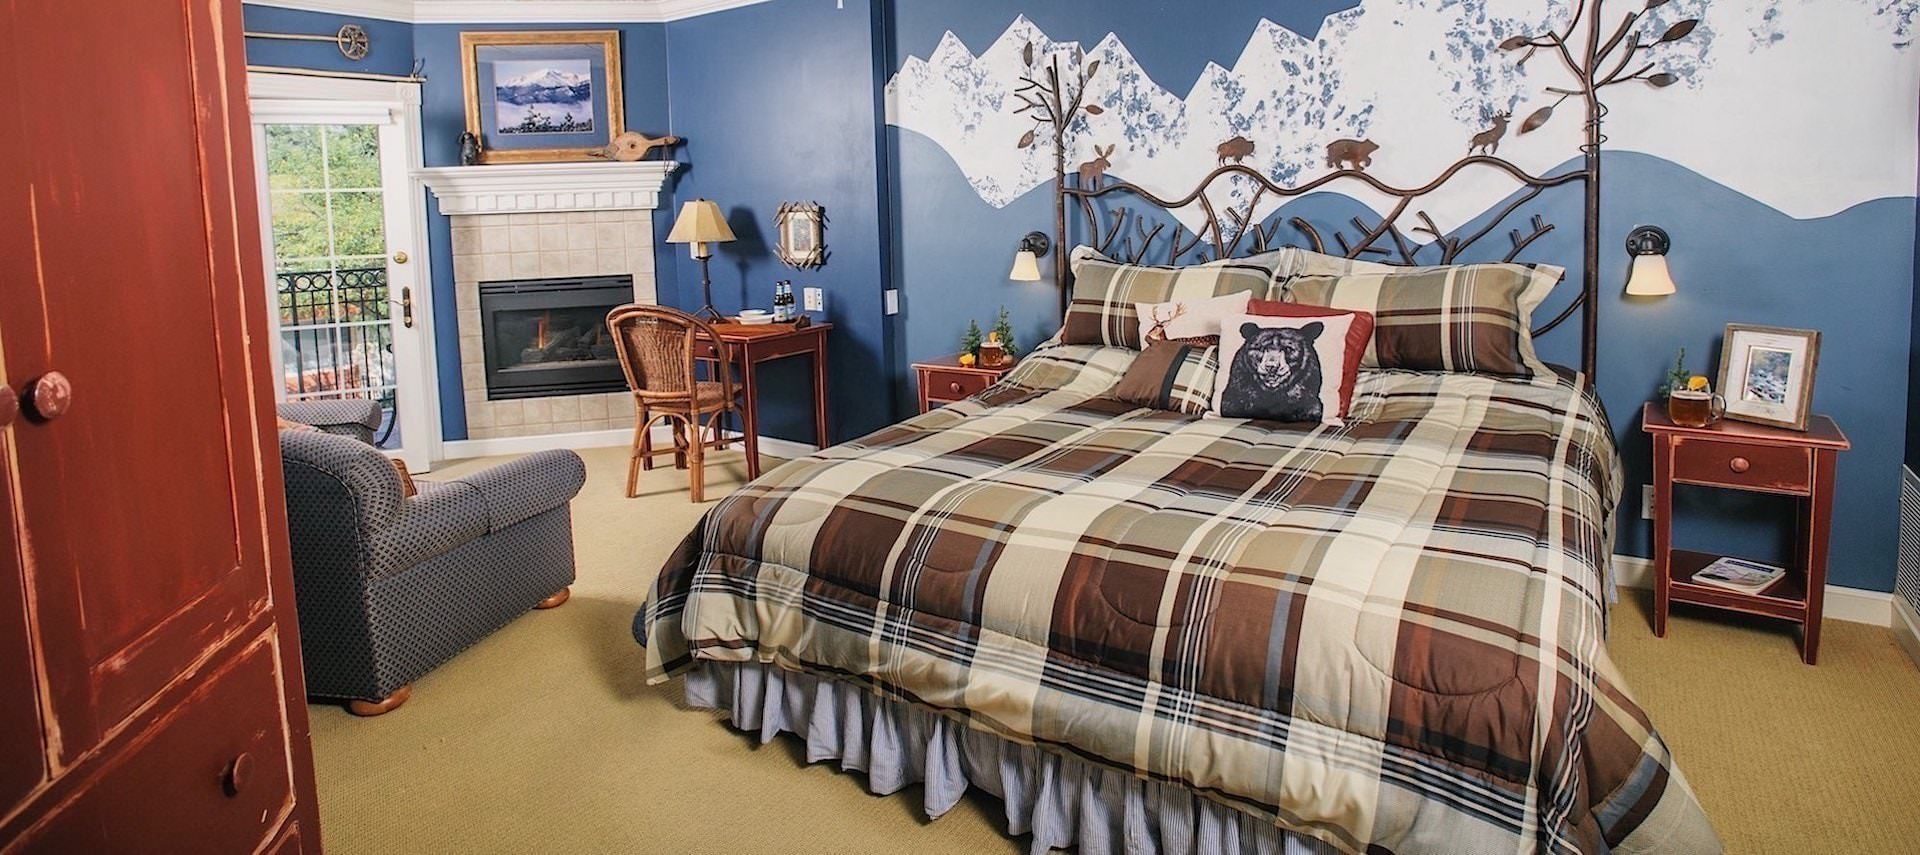 Bedroom with light colored carpeting, blue walls with white mountain range on ascent wall, decorative wrought iron headboard, multicolored plaid bedding, sitting area, desk, and fireplace